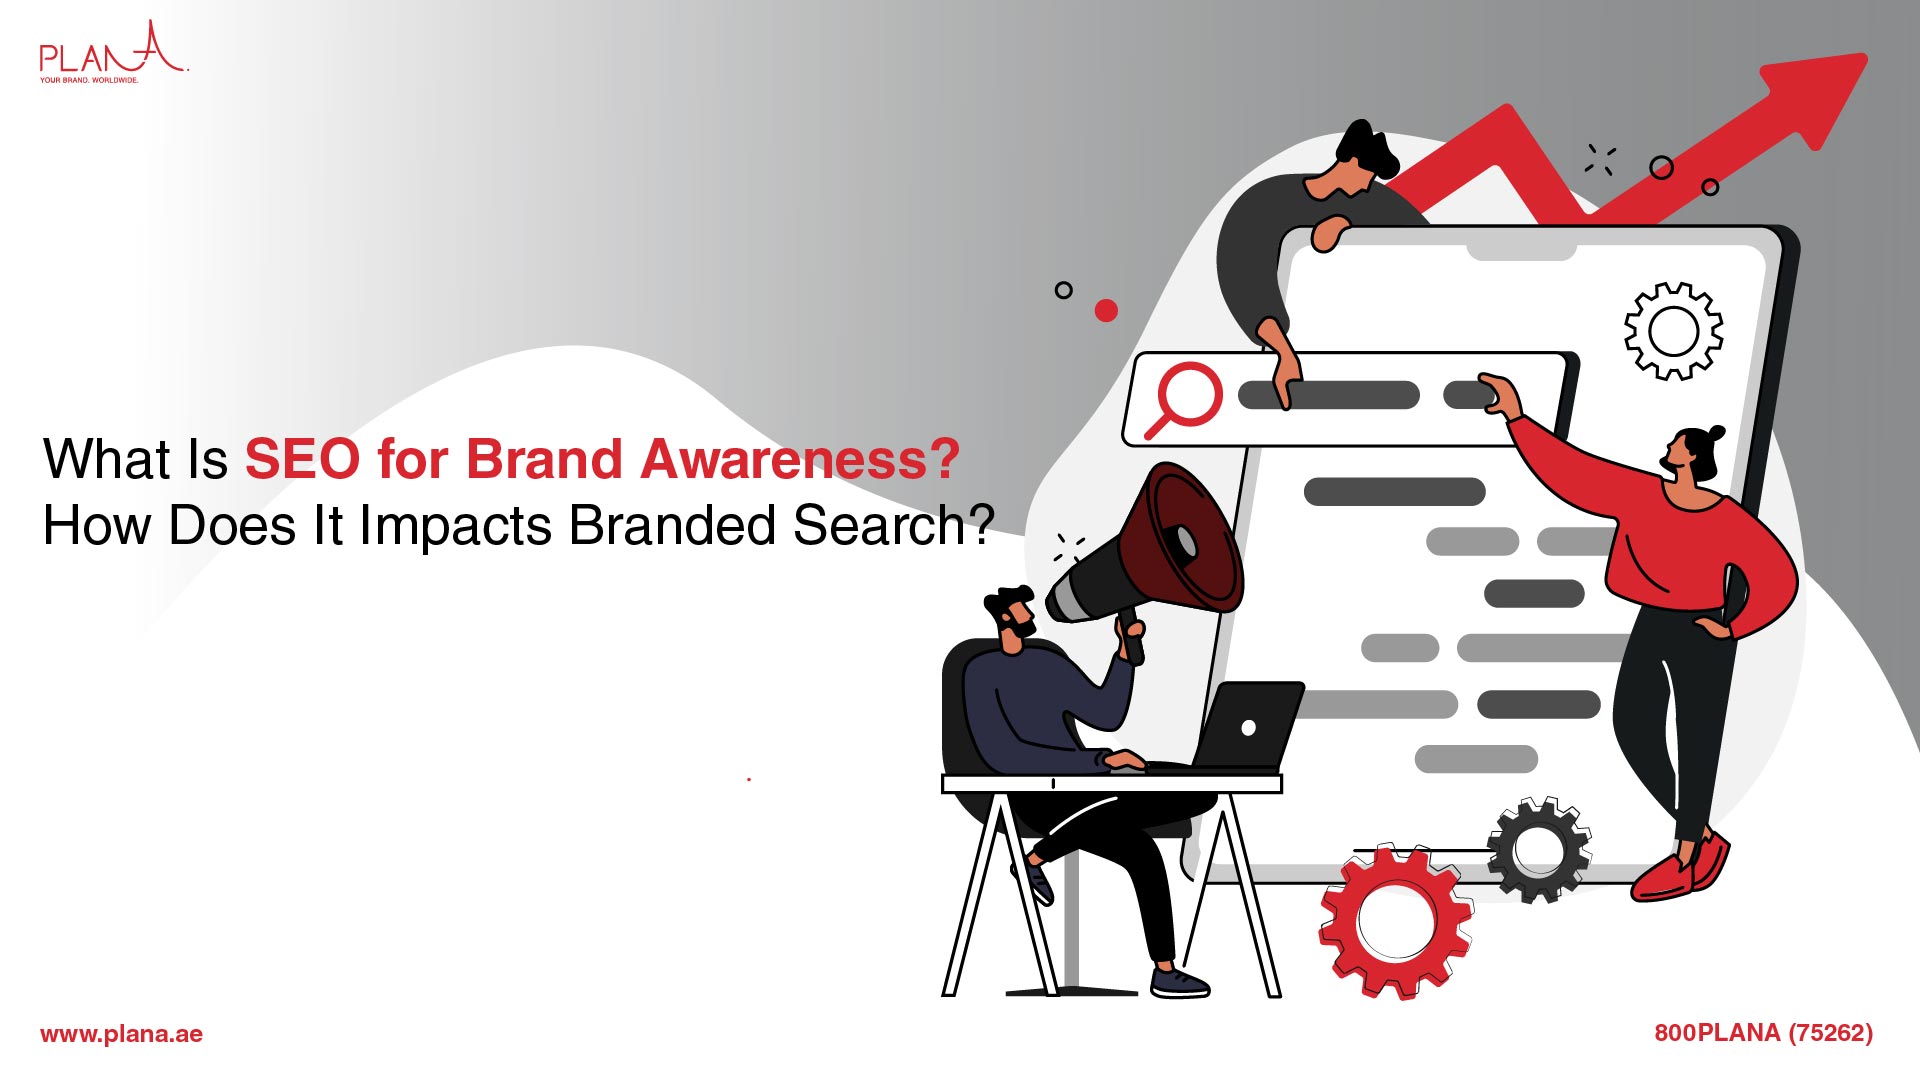 What Is SEO for Brand Awareness? How Does It Impacts Branded Search?